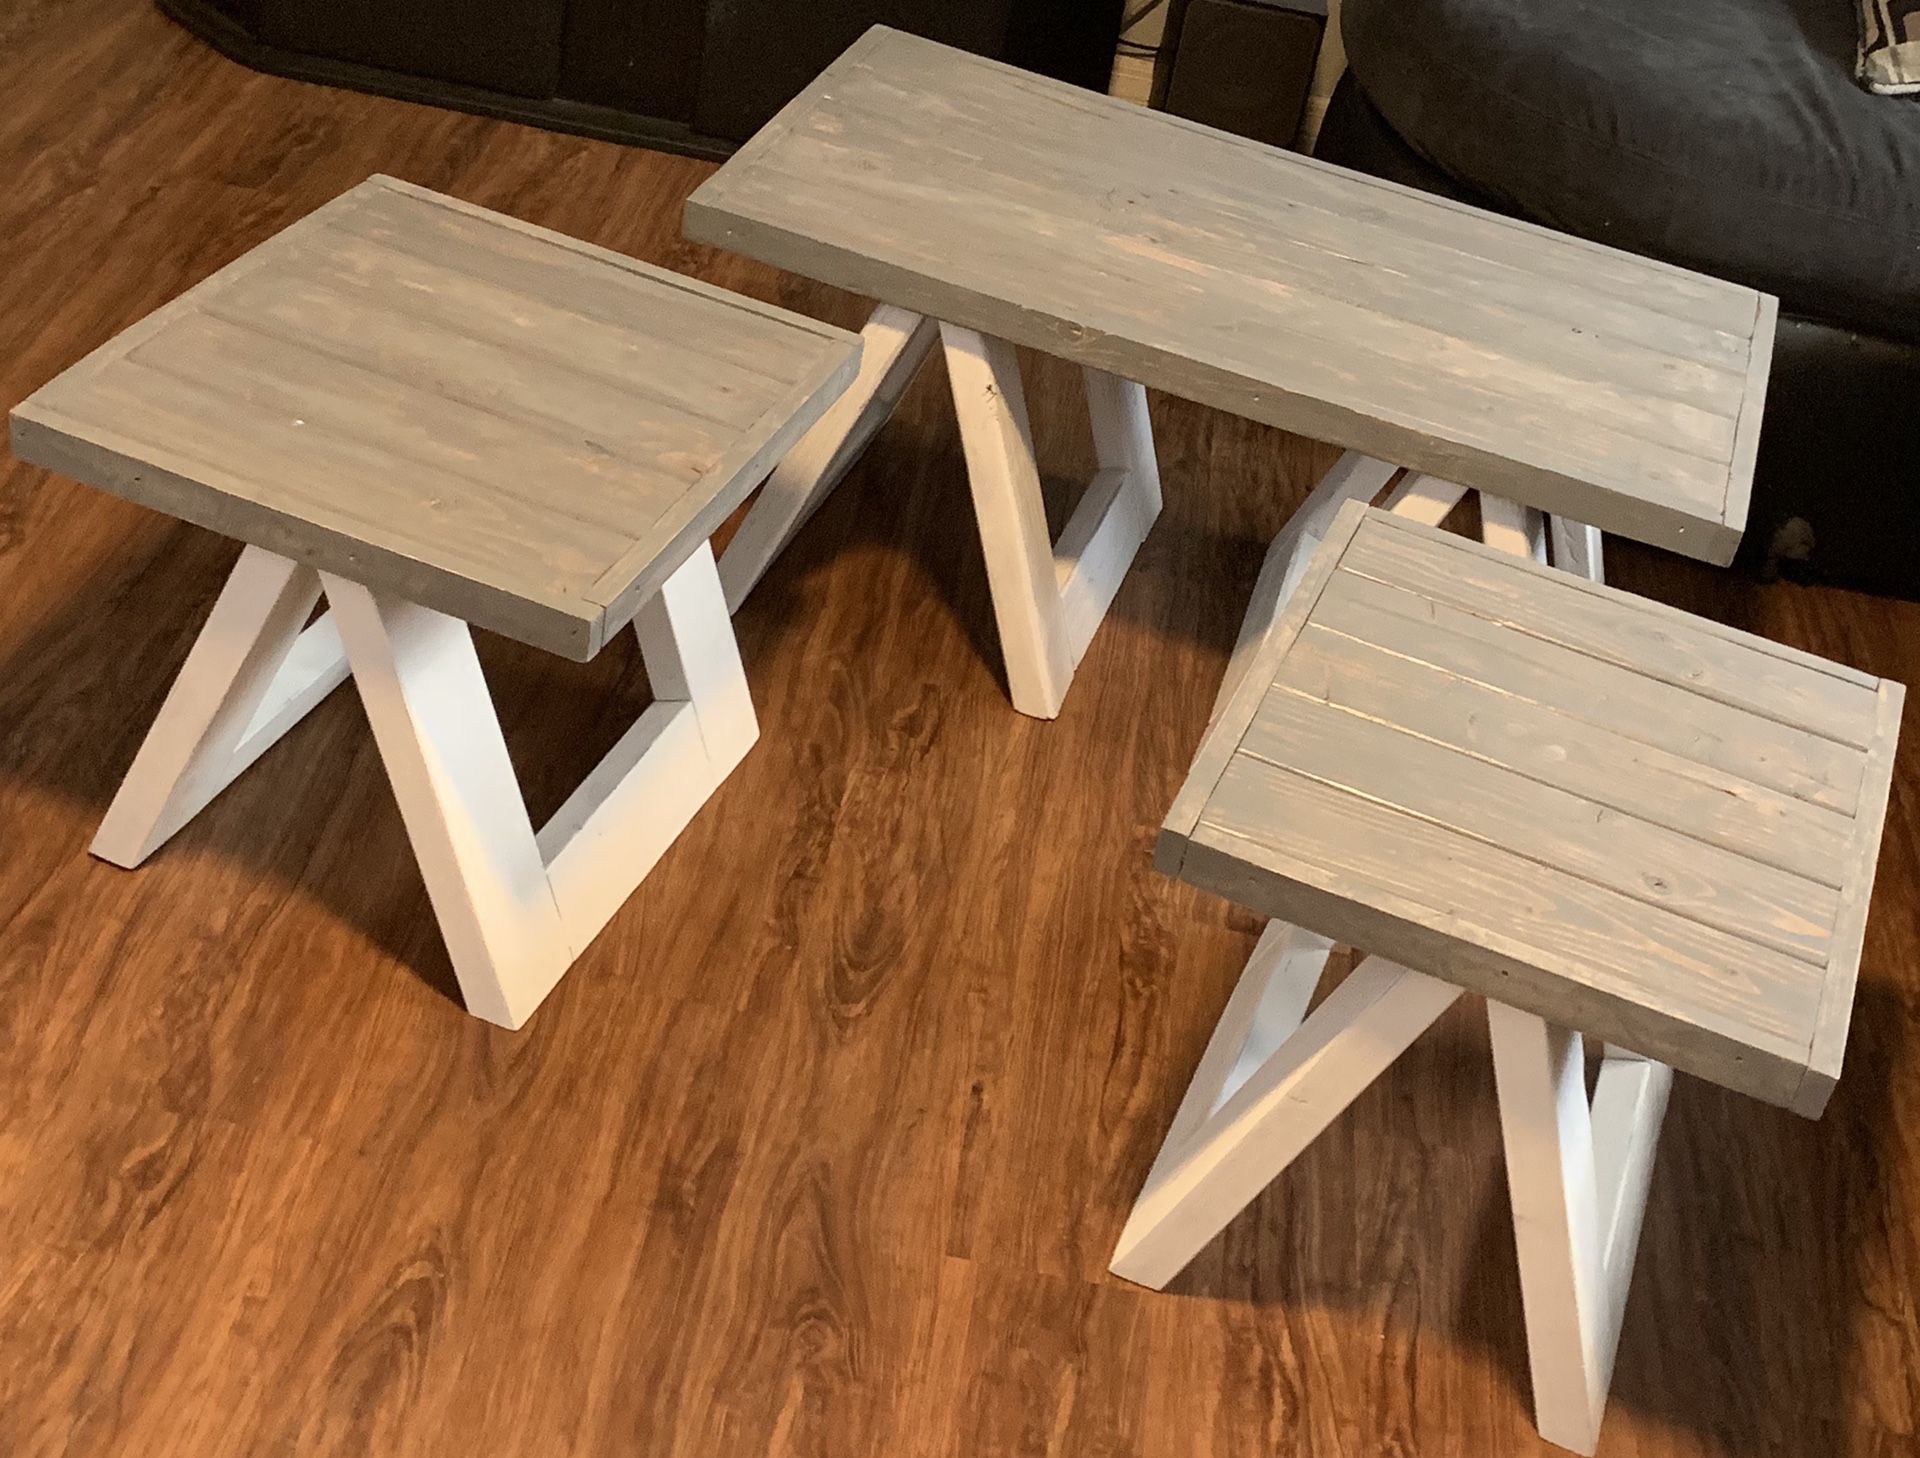 End tables & coffee table